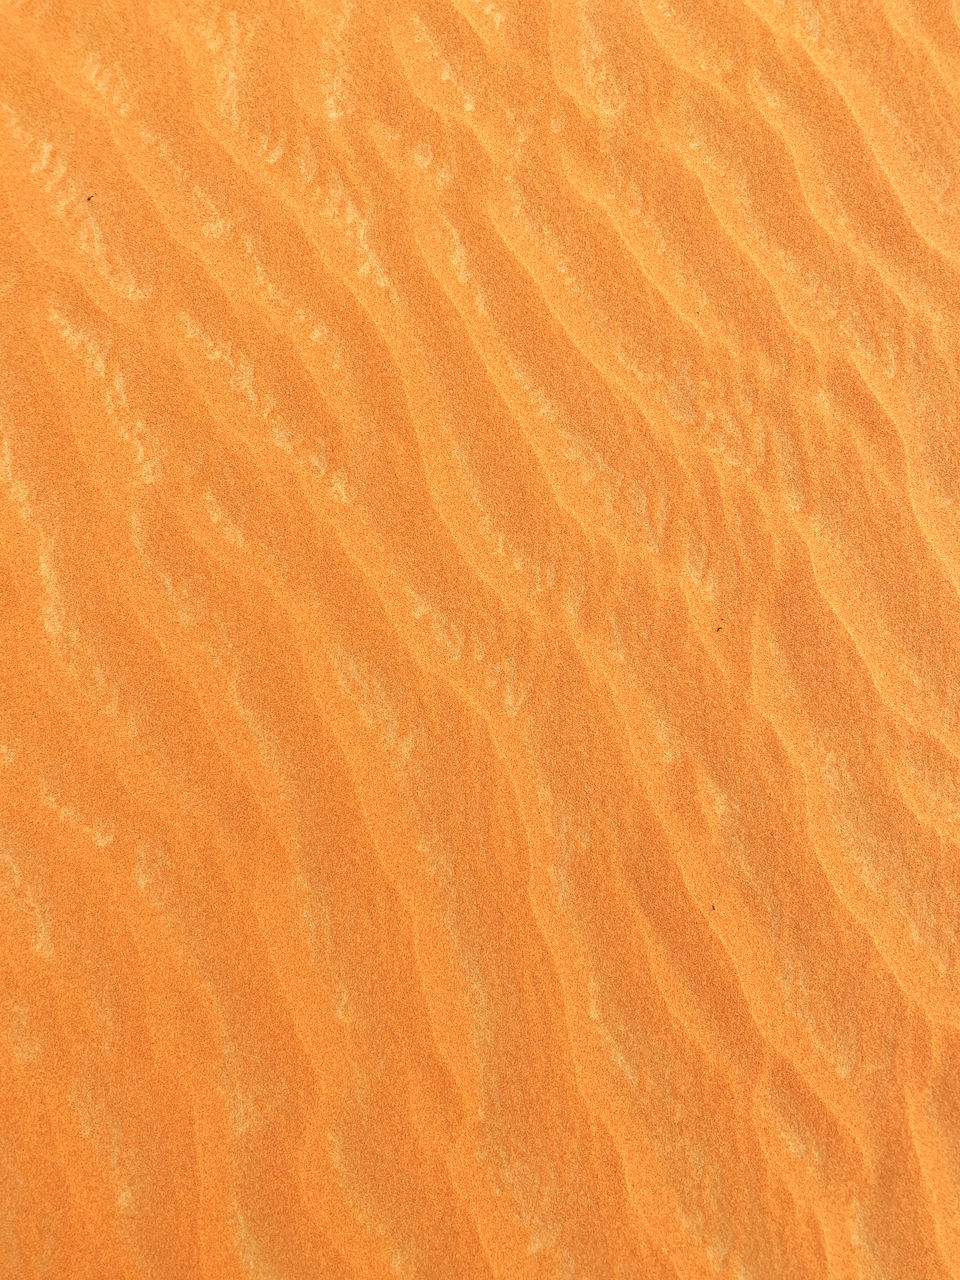 backgrounds, pattern, full frame, orange, land, textured, no people, floor, laminate flooring, orange color, nature, sand, wood, wood flooring, wave pattern, brown, beauty in nature, flooring, hardwood, peach, close-up, abstract, plywood, outdoors, scenics - nature, yellow, landscape